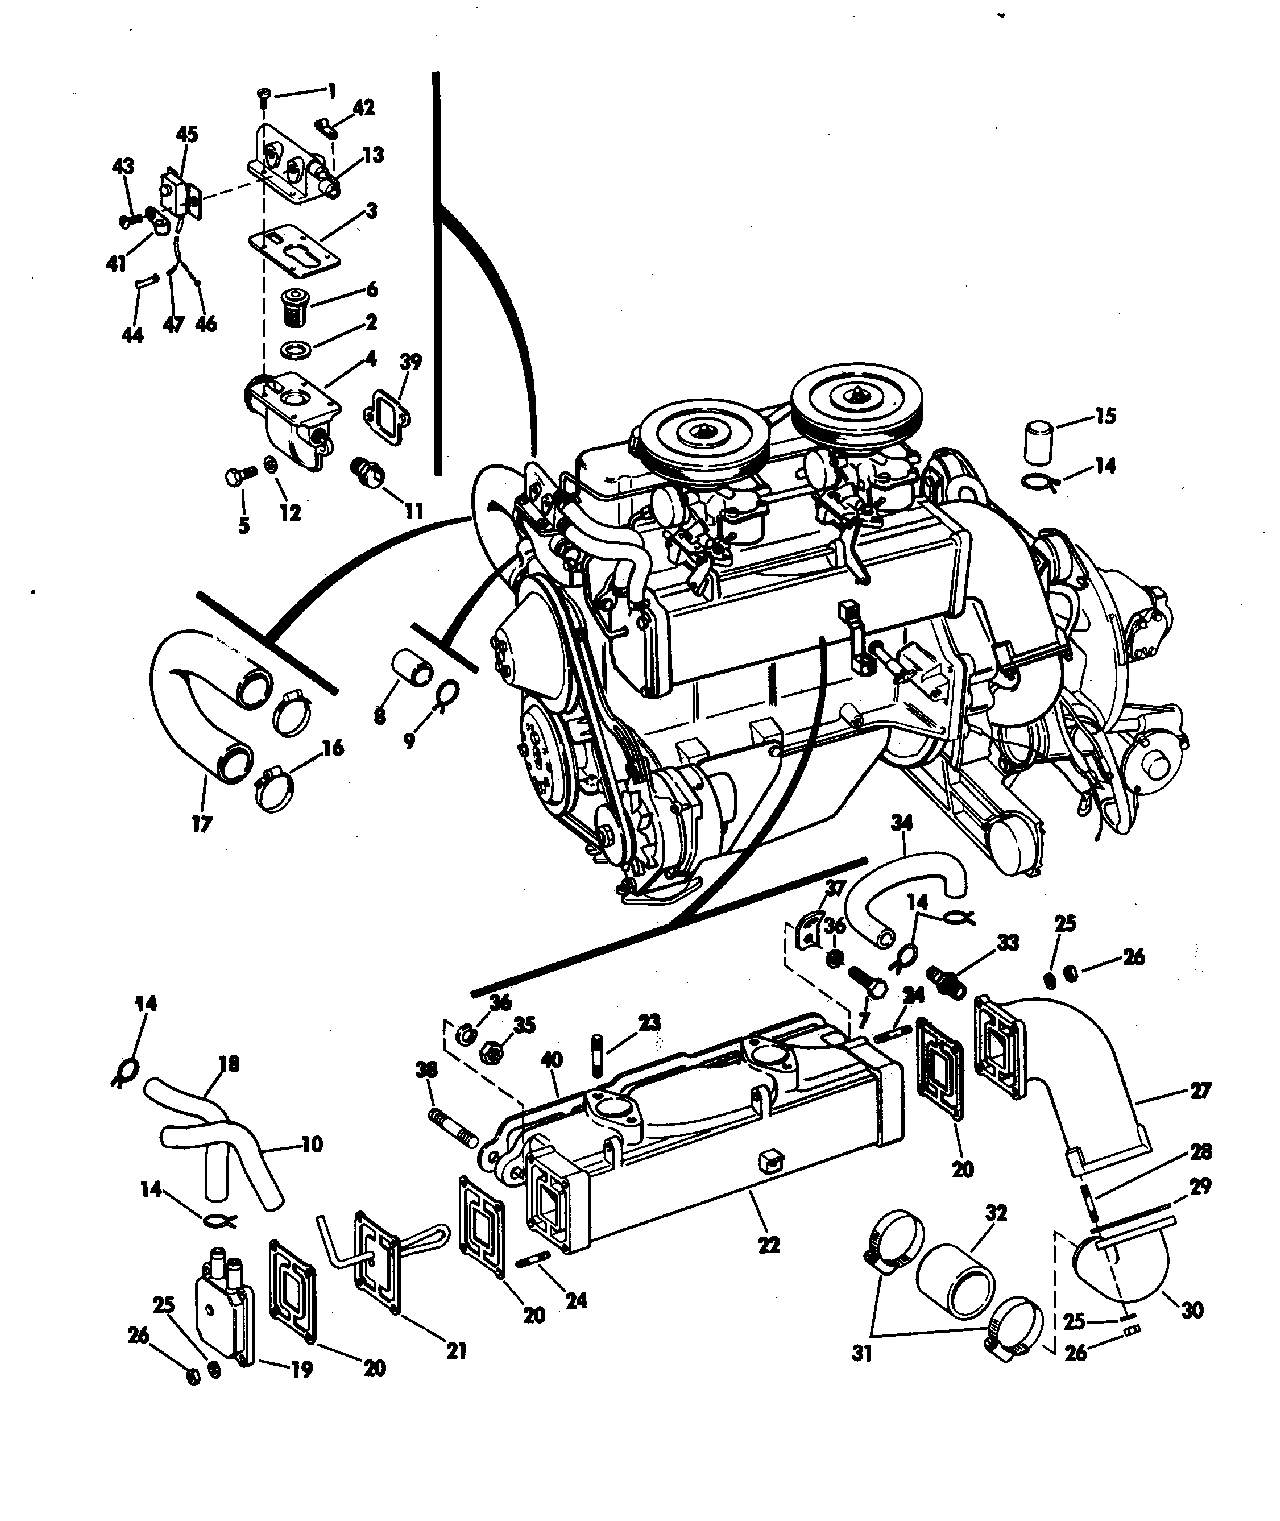 35 Johnson Outboard Cooling System Diagram - Wiring ...